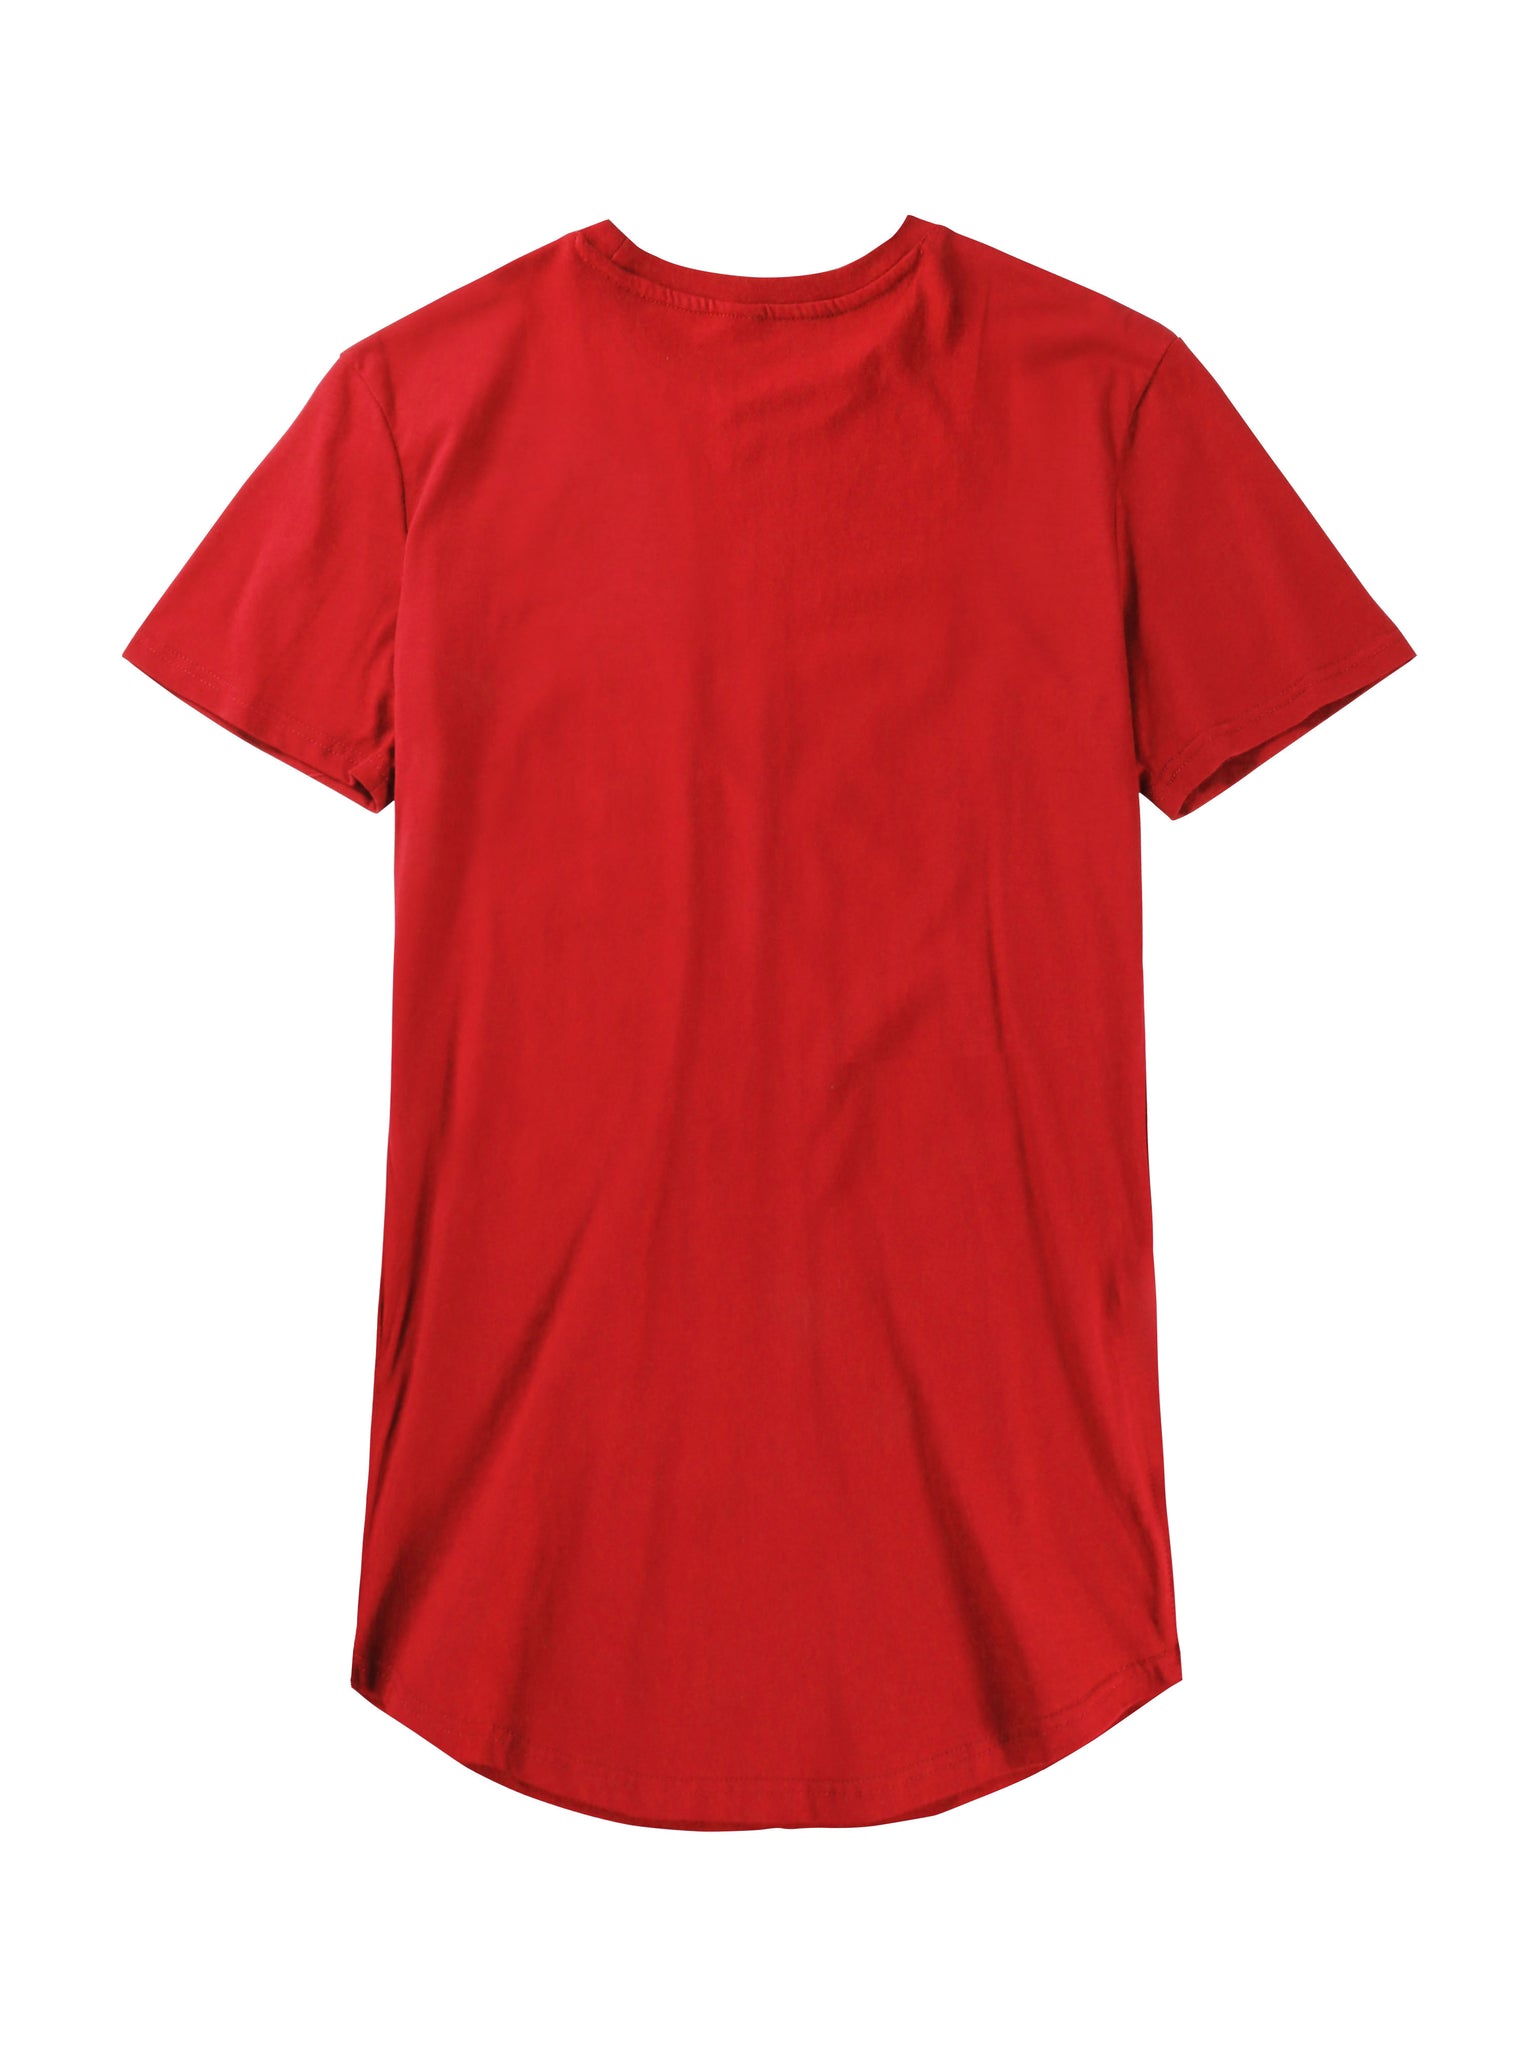 Premium - & T-Shirt with Tops T | Zipper Hipster and Longline Shirts Side Beyond Hat Mens Tank